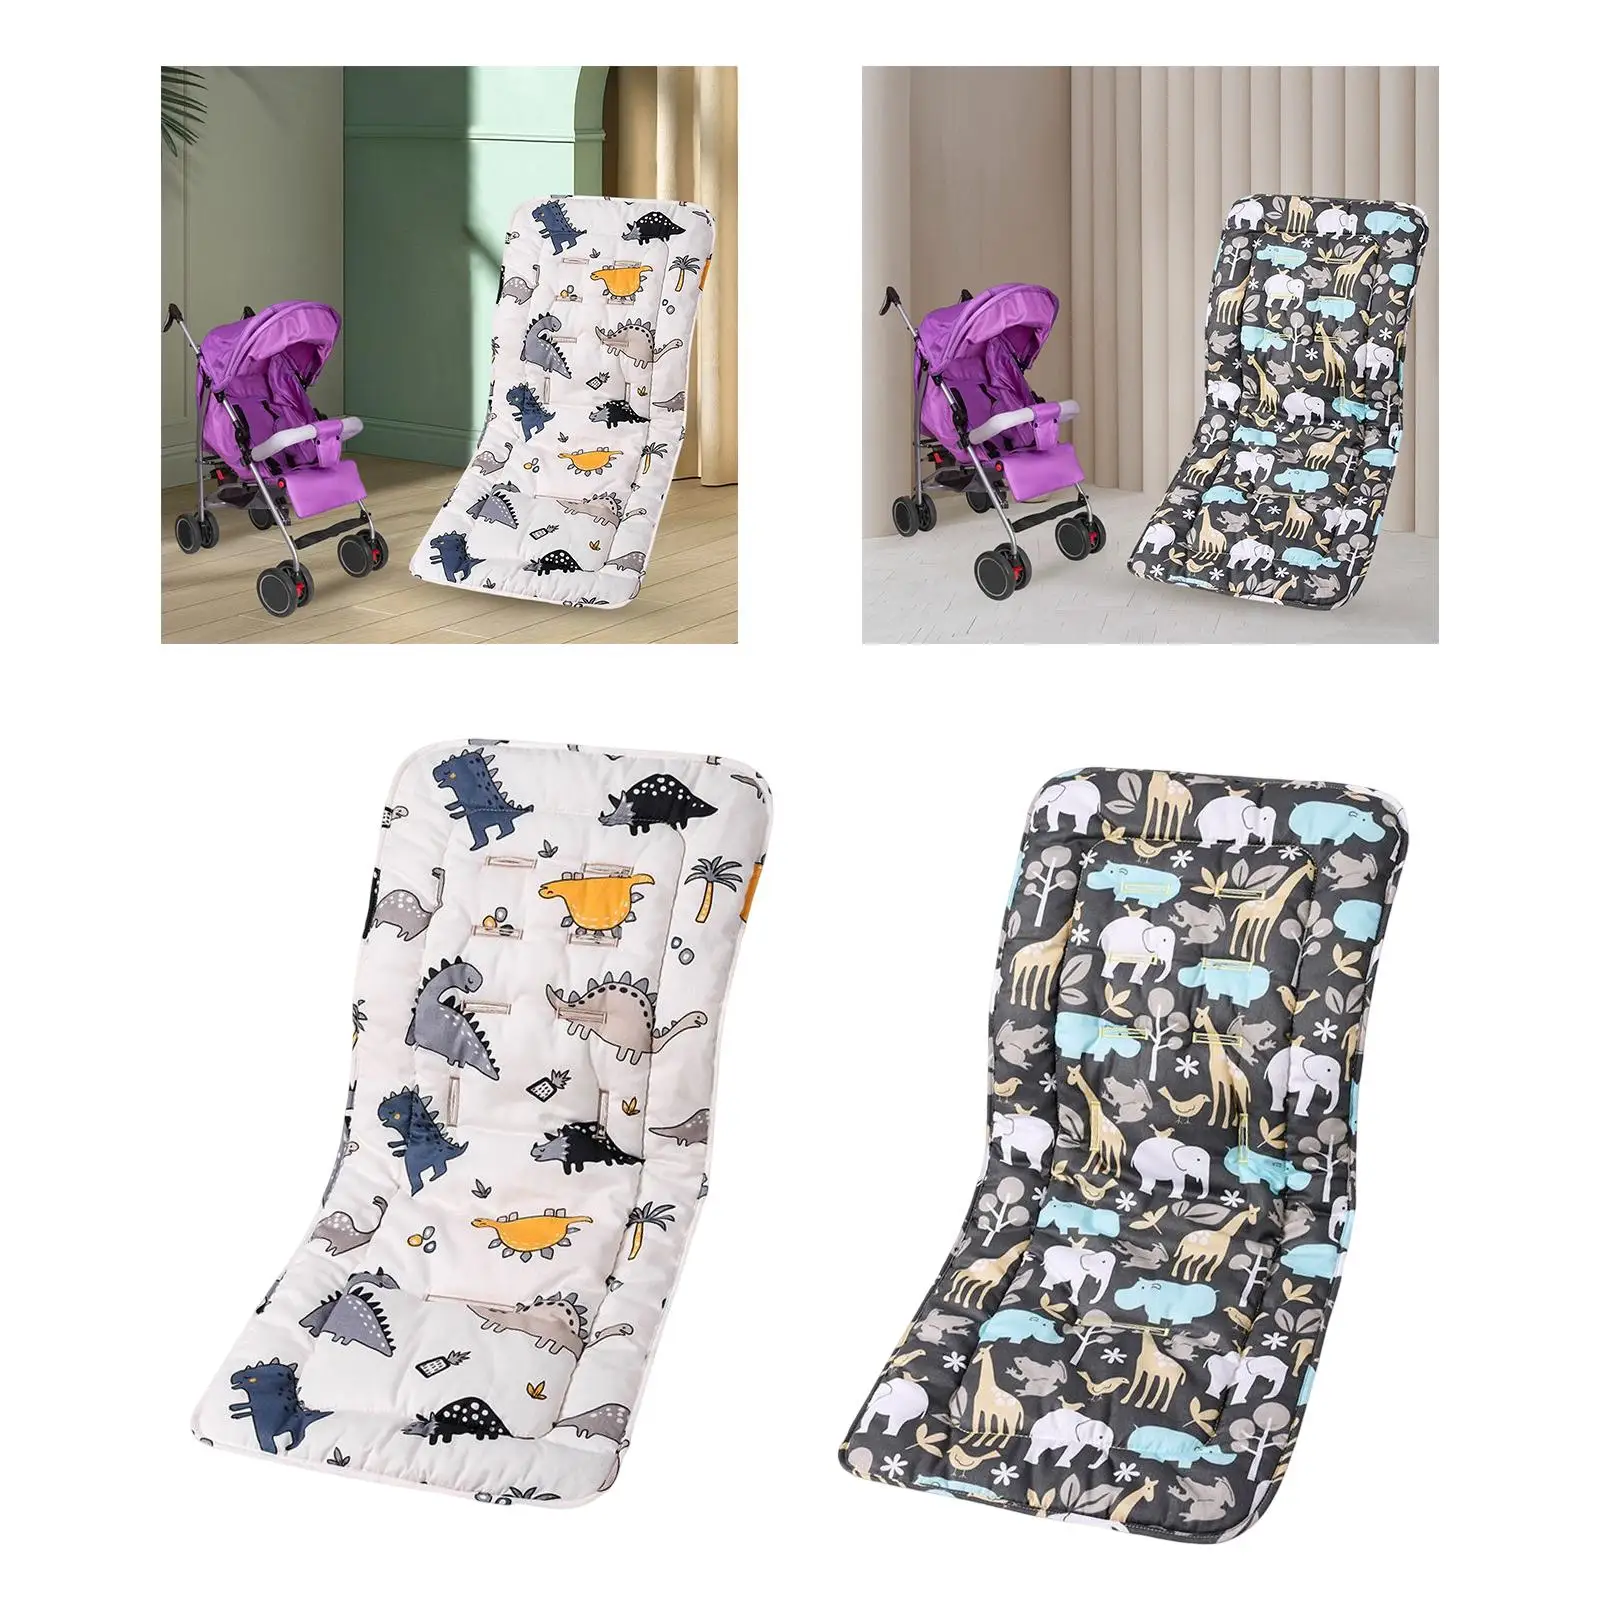 Universal Baby Carriage Cushion, Seat Liners, Pram Seat Cushion, Comfortable Thicken Liner Mat for Pushchair